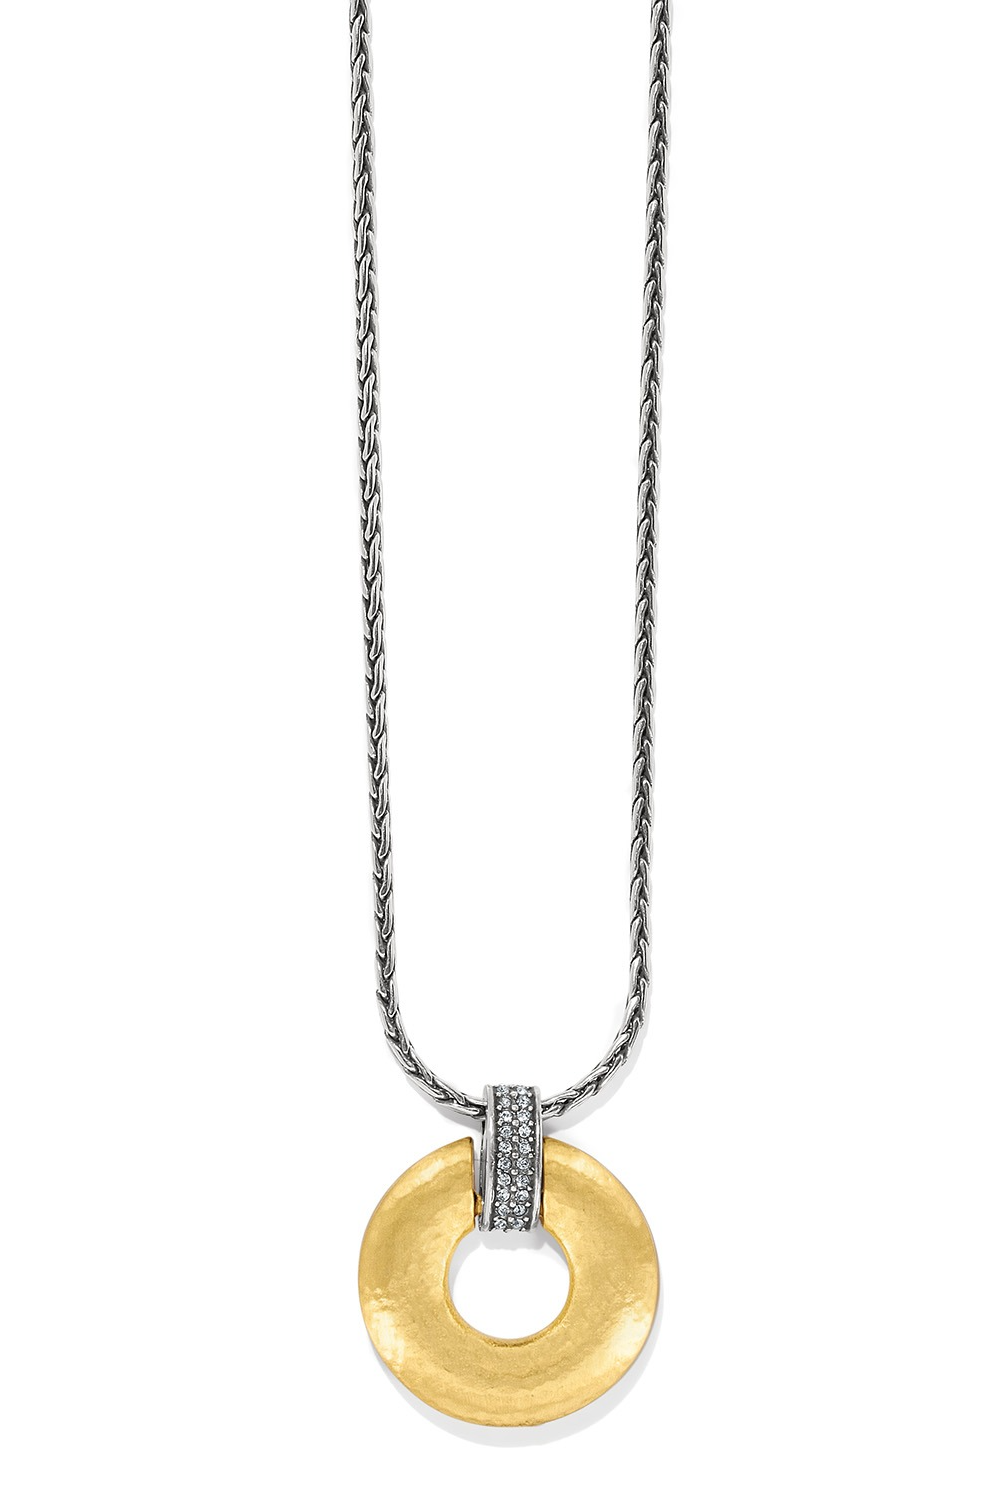 Meridian Geo Small Necklace